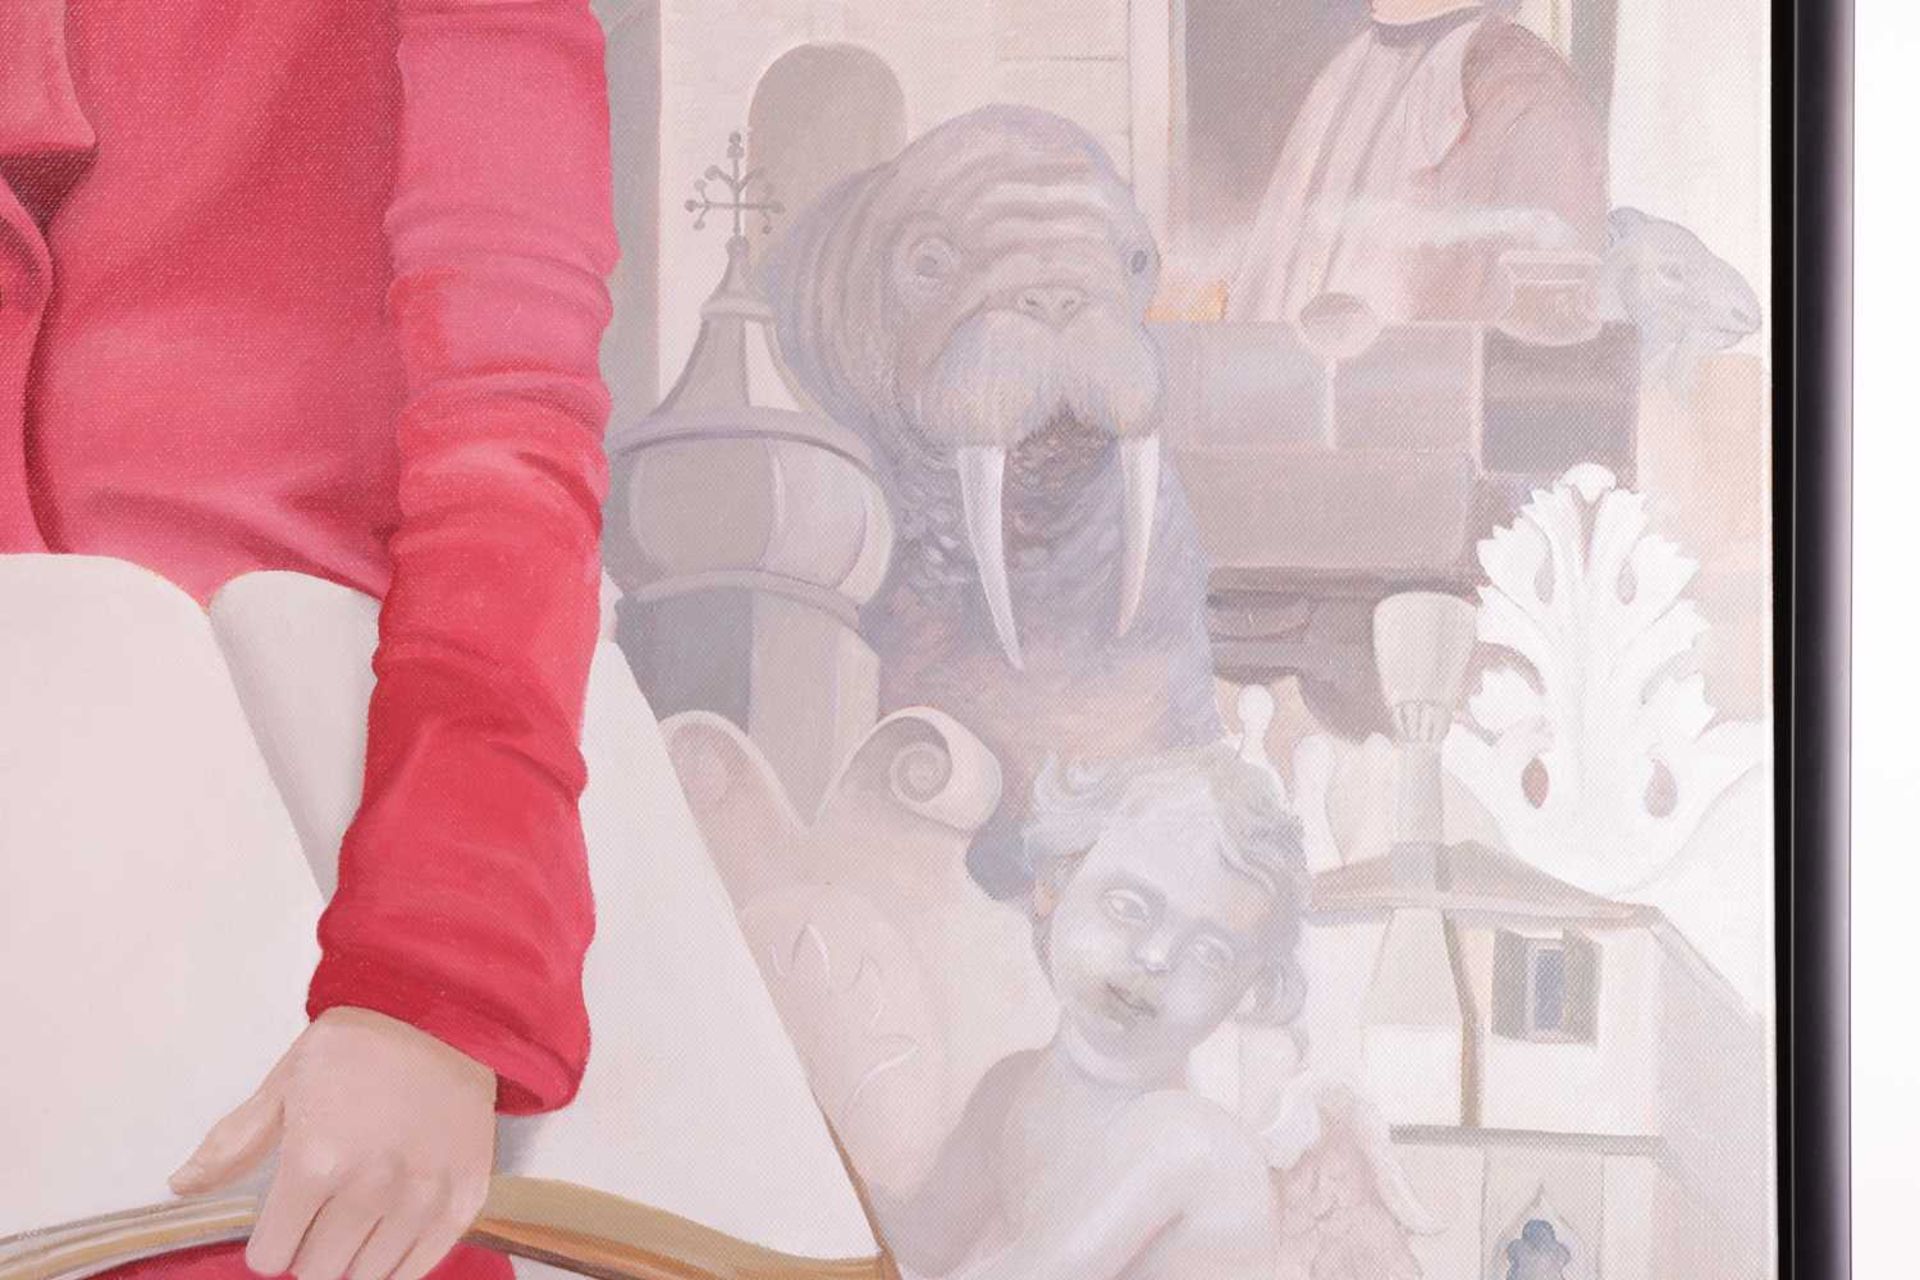 Lizzie Riches (b. 1950), 'Heir to the City' (2010/11), signed 'Lizzie Riches' (lower centre), labell - Image 7 of 12